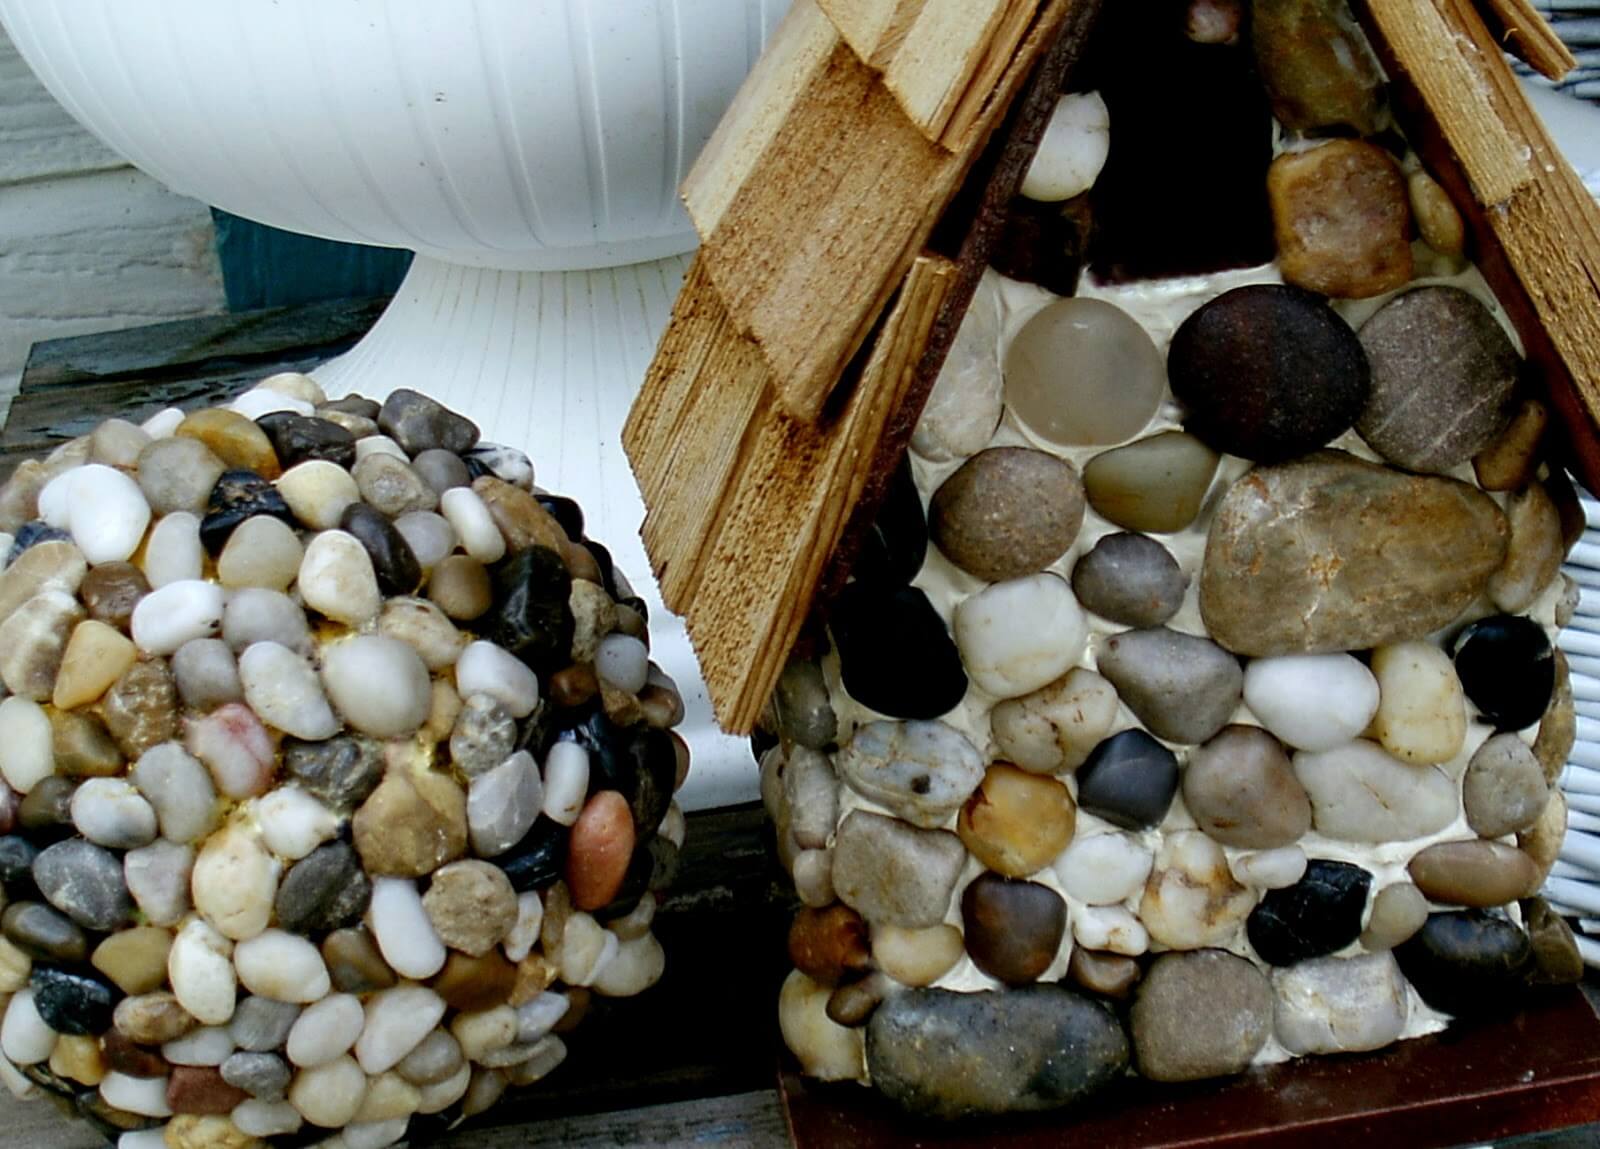 Cover a Ball and Birdhouse in Pebbles